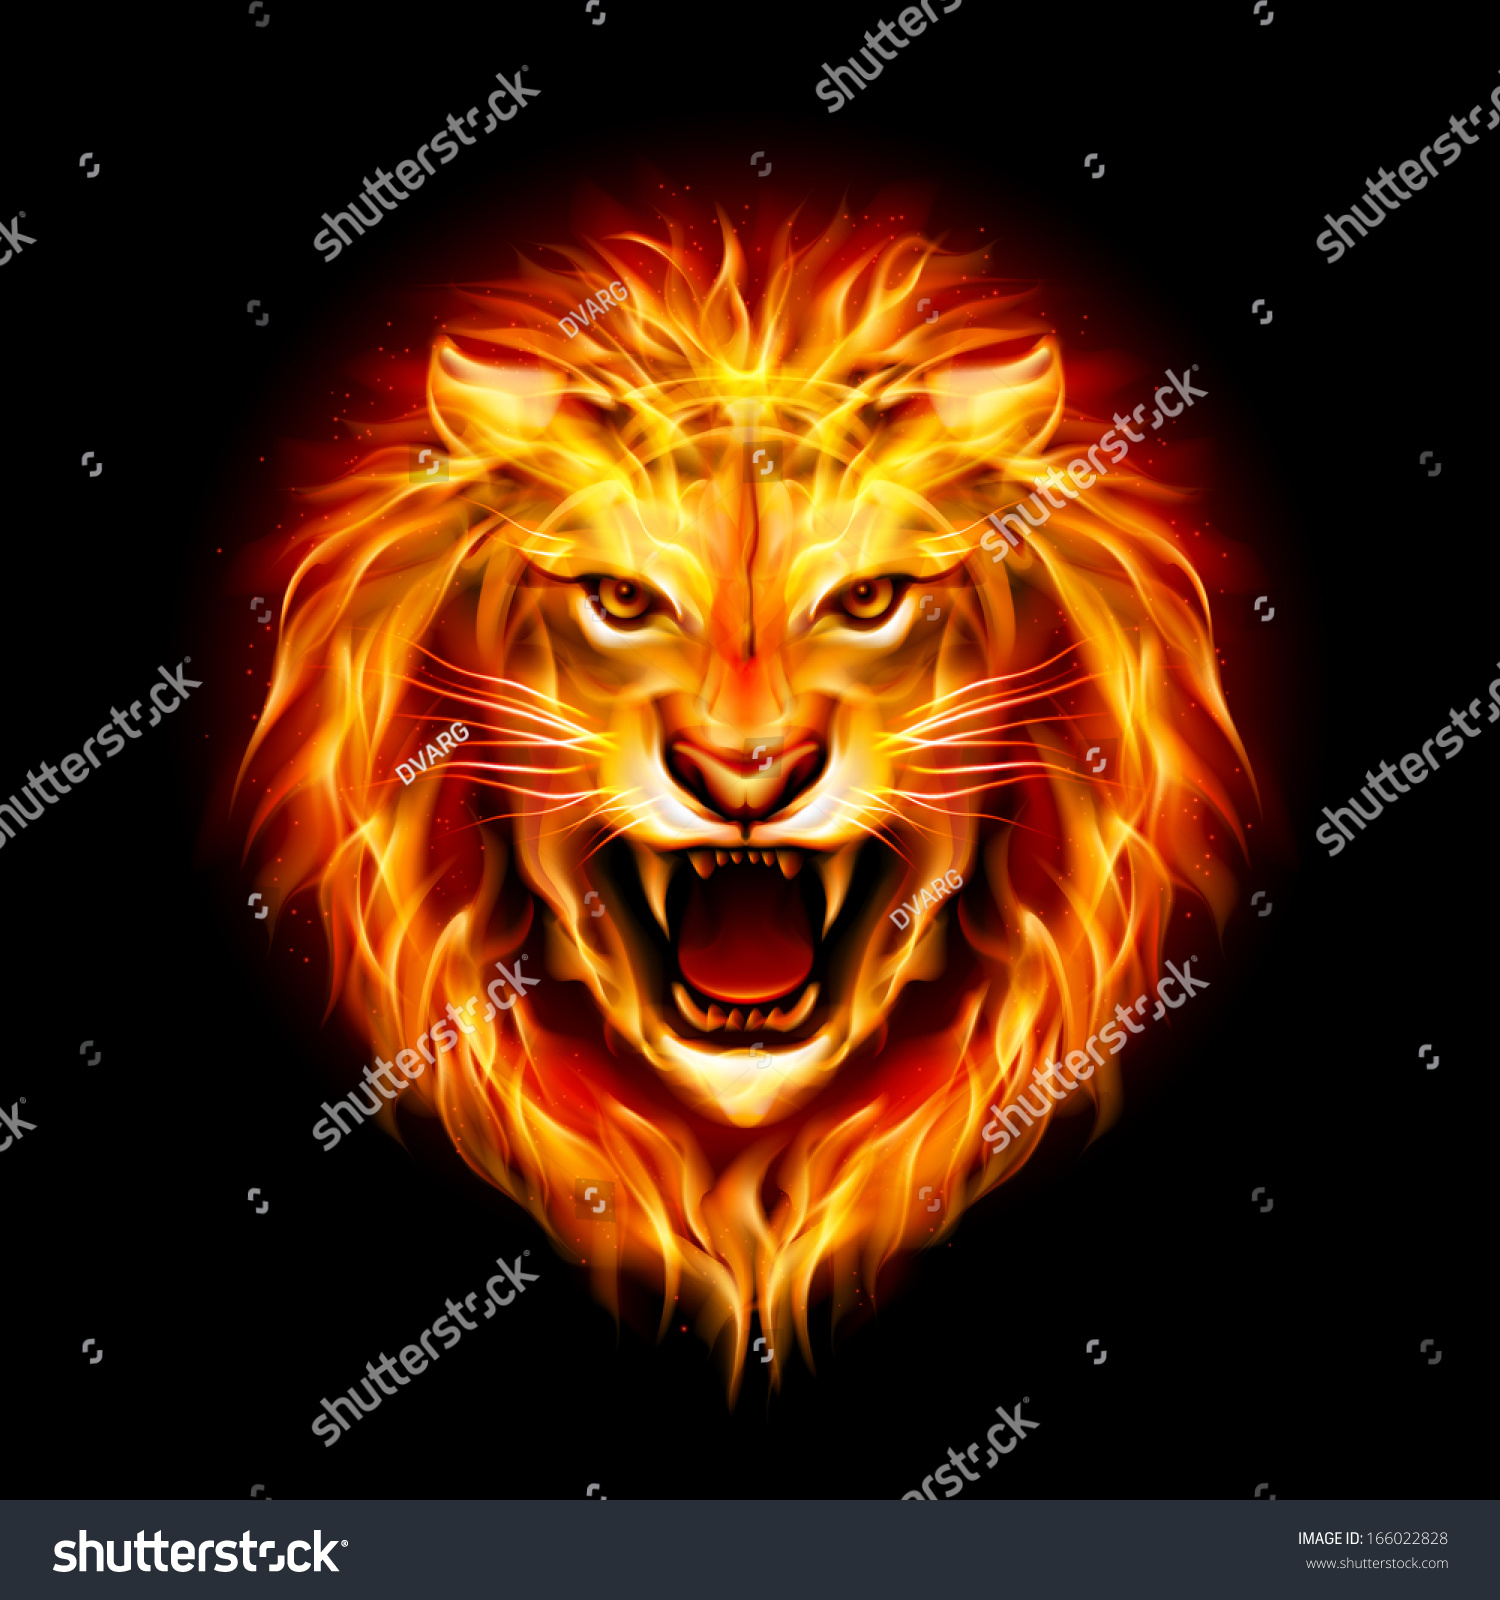 stock-vector-head-of-aggressive-fire-lion-isolated-on-black-background-166022828